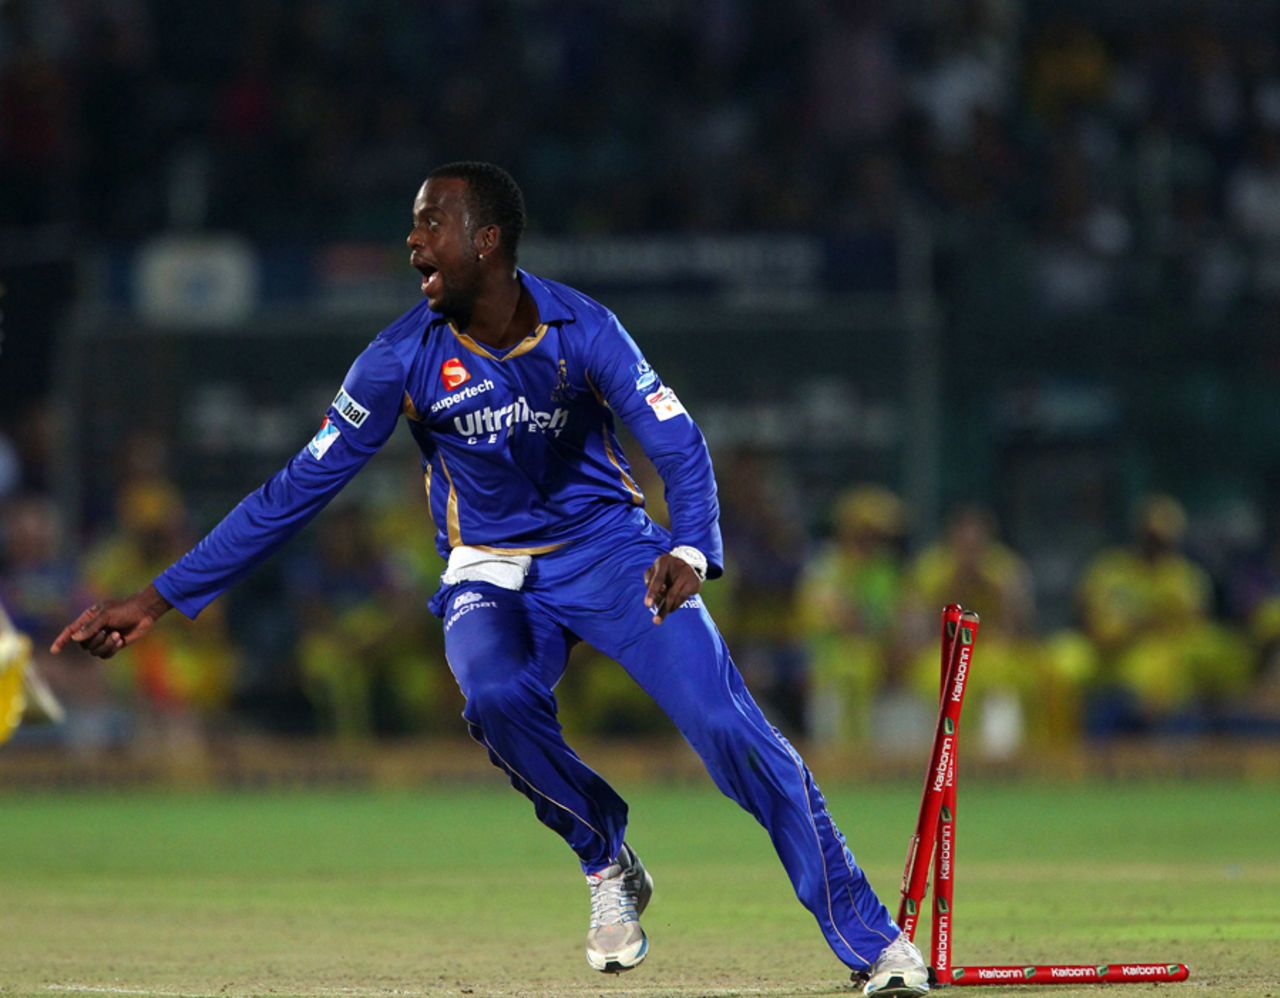 Kevon Cooper is ecstatic after Michael Hussey is run out, Rajasthan Royals v Chennai Super Kings, 1st semi-final, Champions League 2013, Jaipur, October 4, 2013